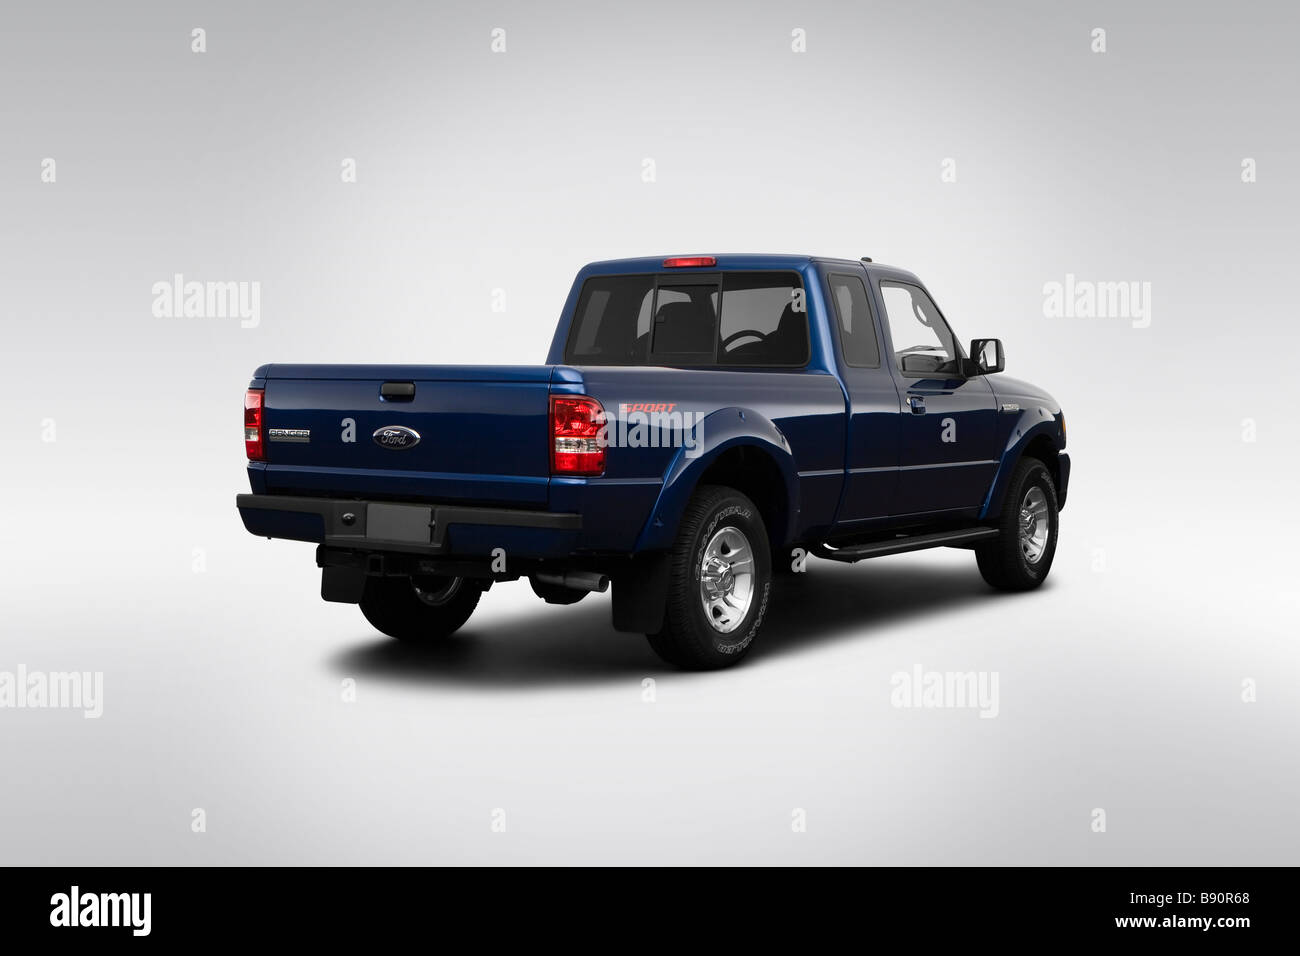 2009 Ford Ranger Sport in Blue - Rear angle view Stock Photo